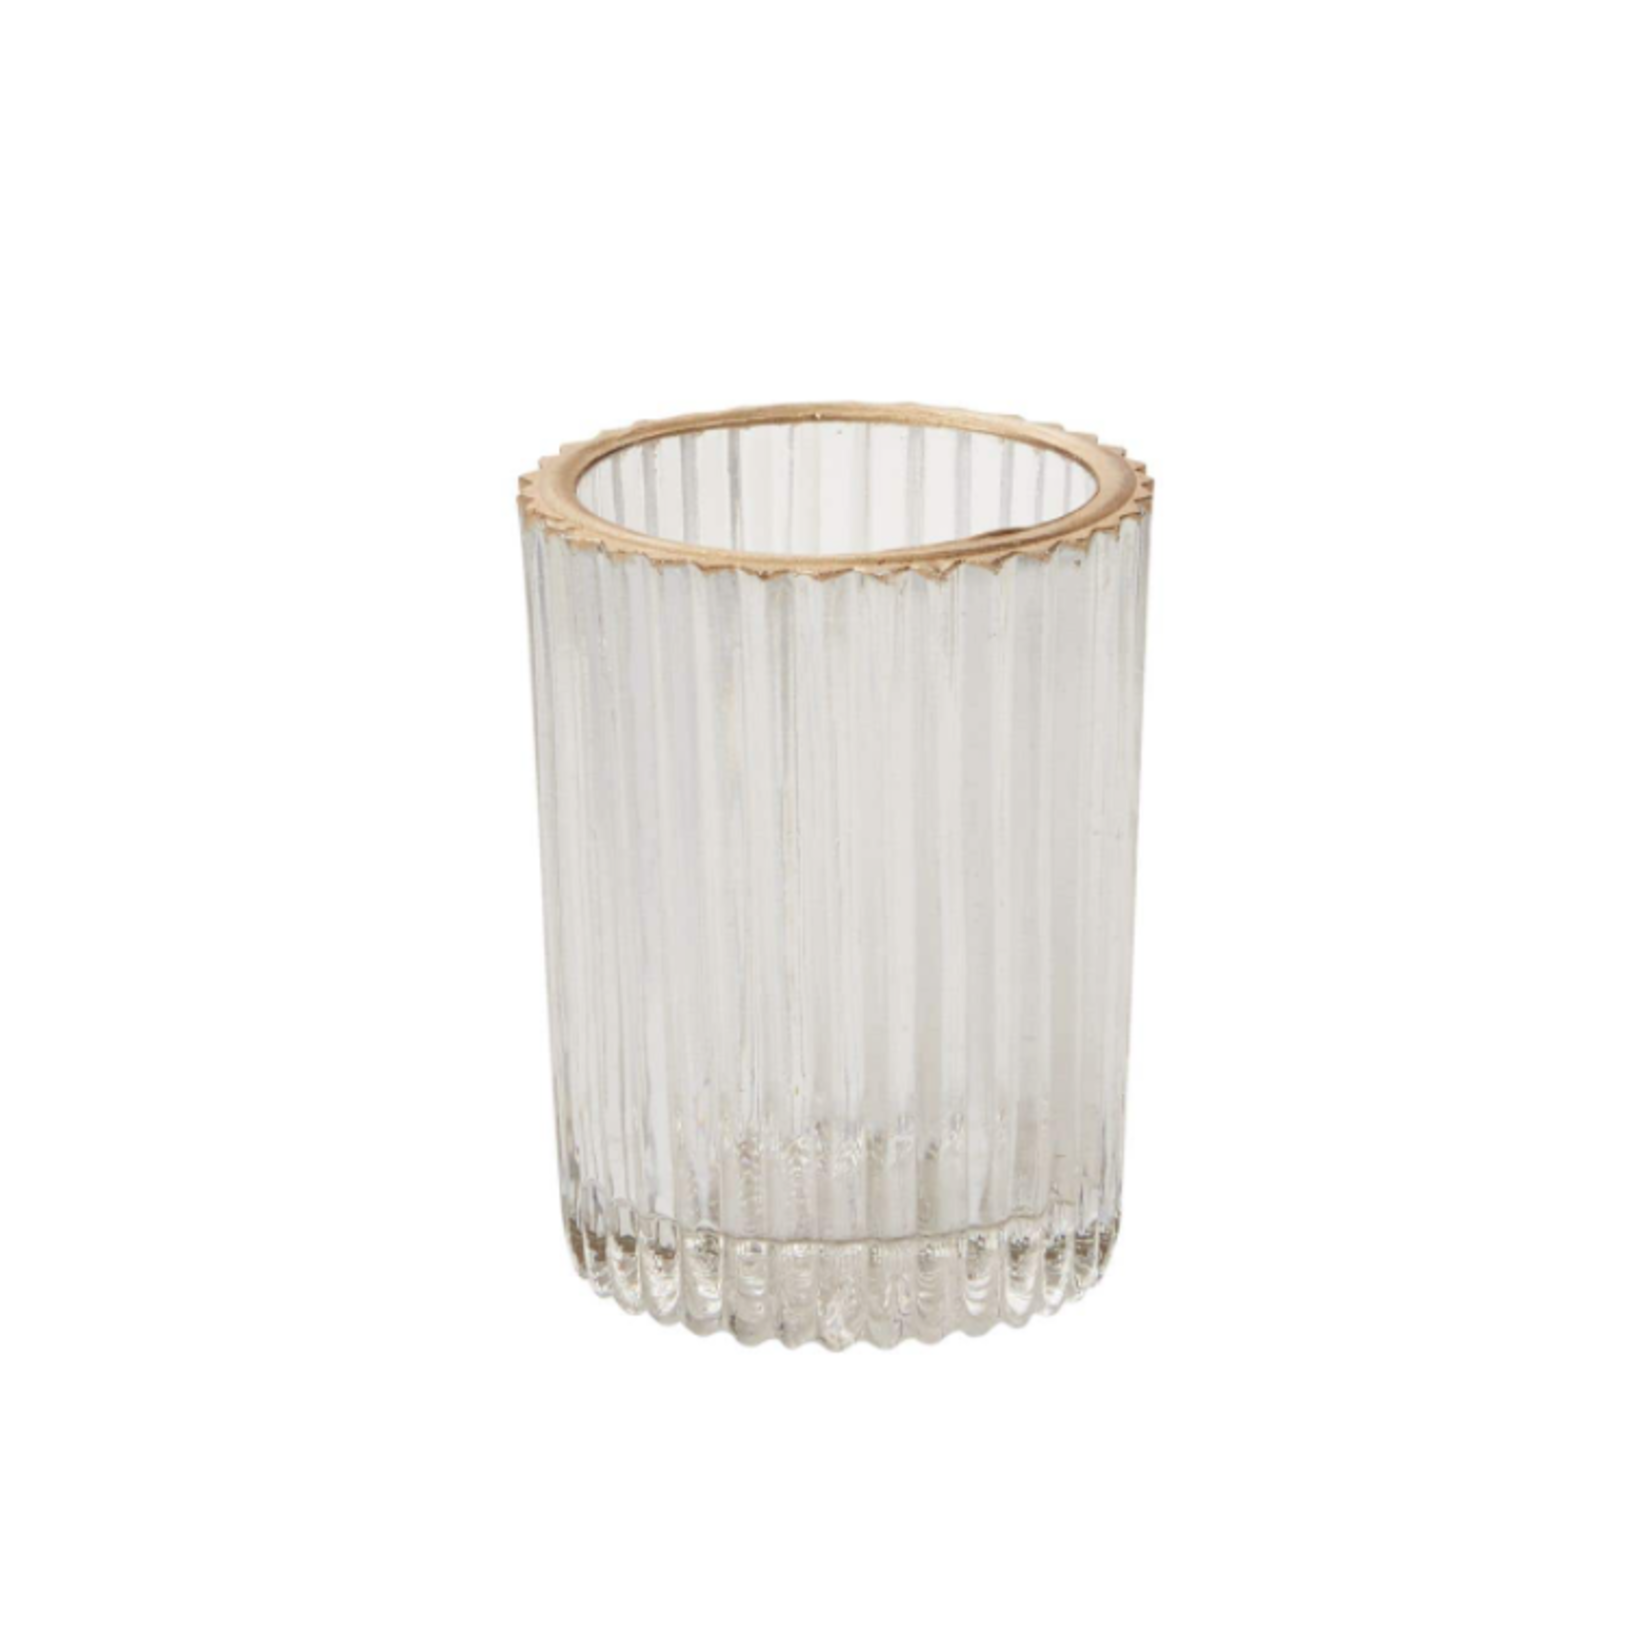 3”H X 3.5” CLEAR GLASS FLUTED RITZY VOTIVE WITH GOLD LIP